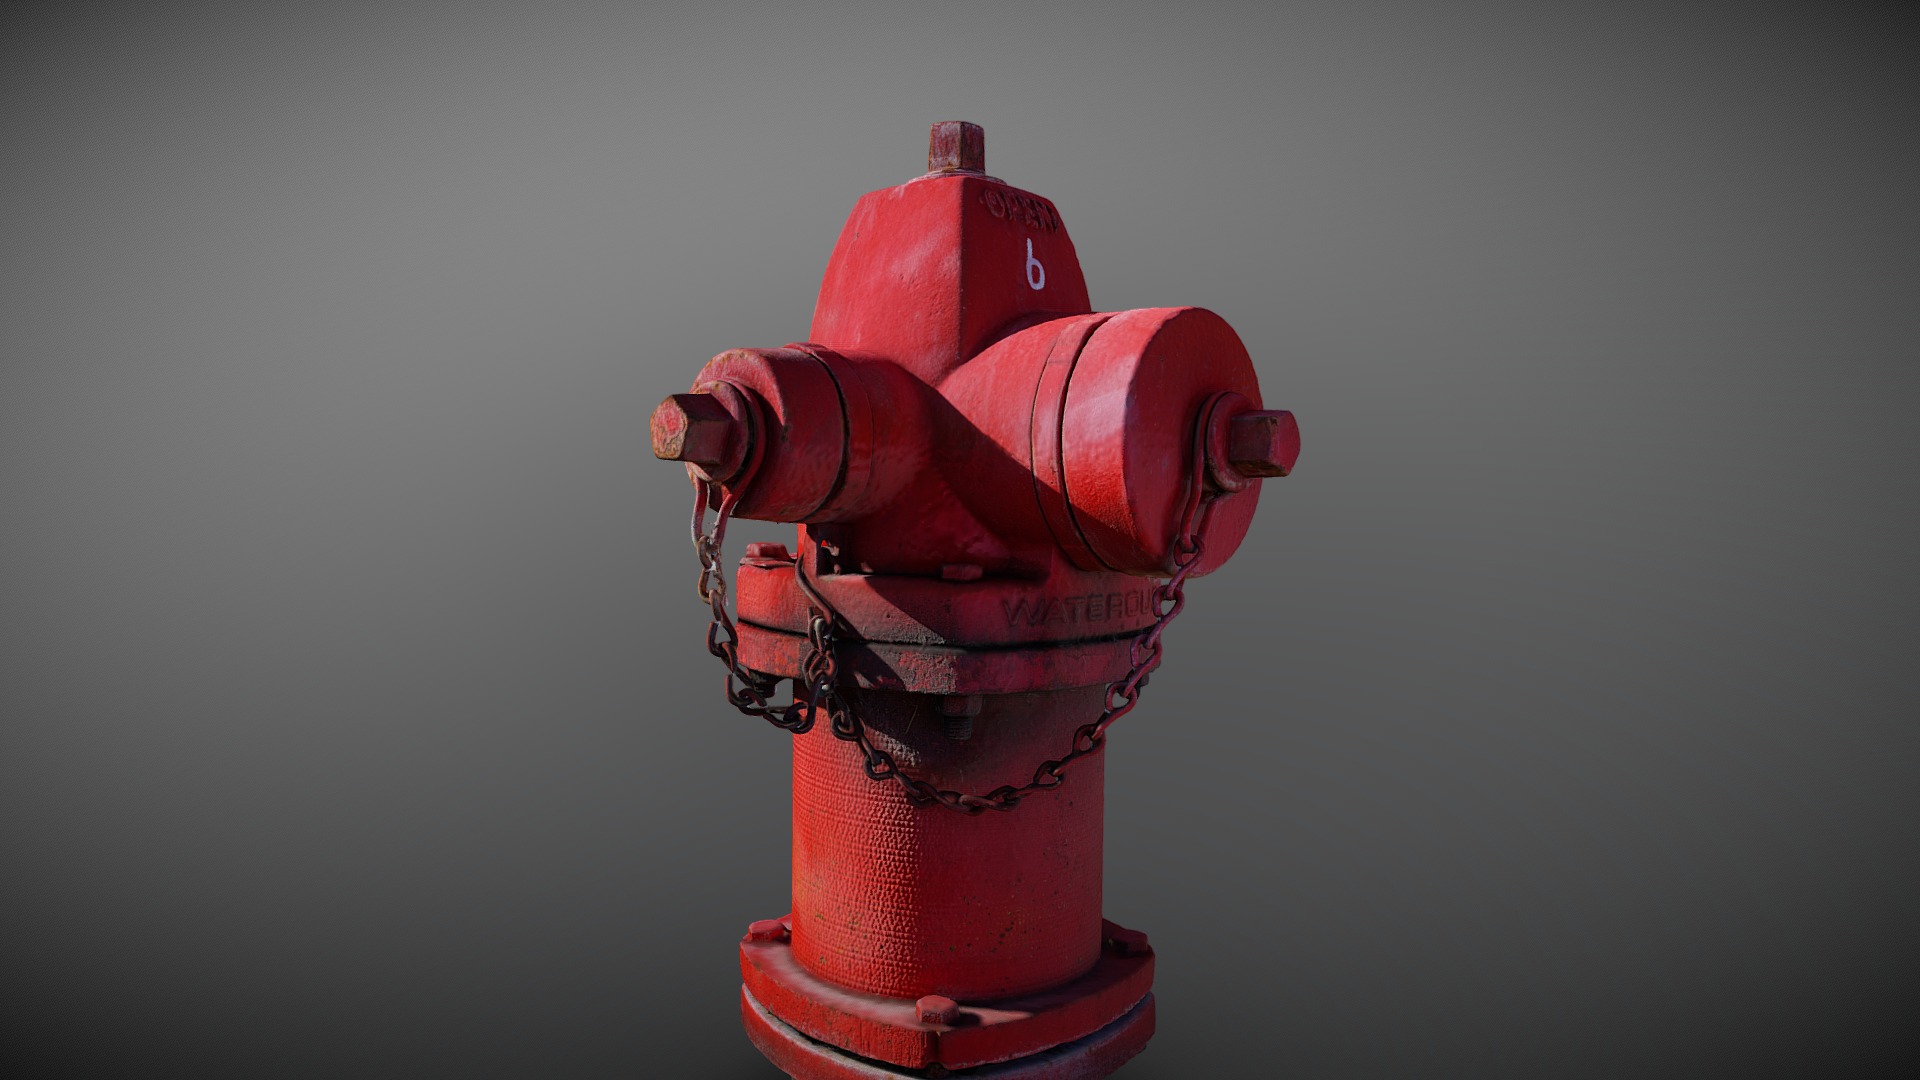 3D model Red Fire Hydrant - This is a 3D model of the Red Fire Hydrant. The 3D model is about a red fire hydrant.